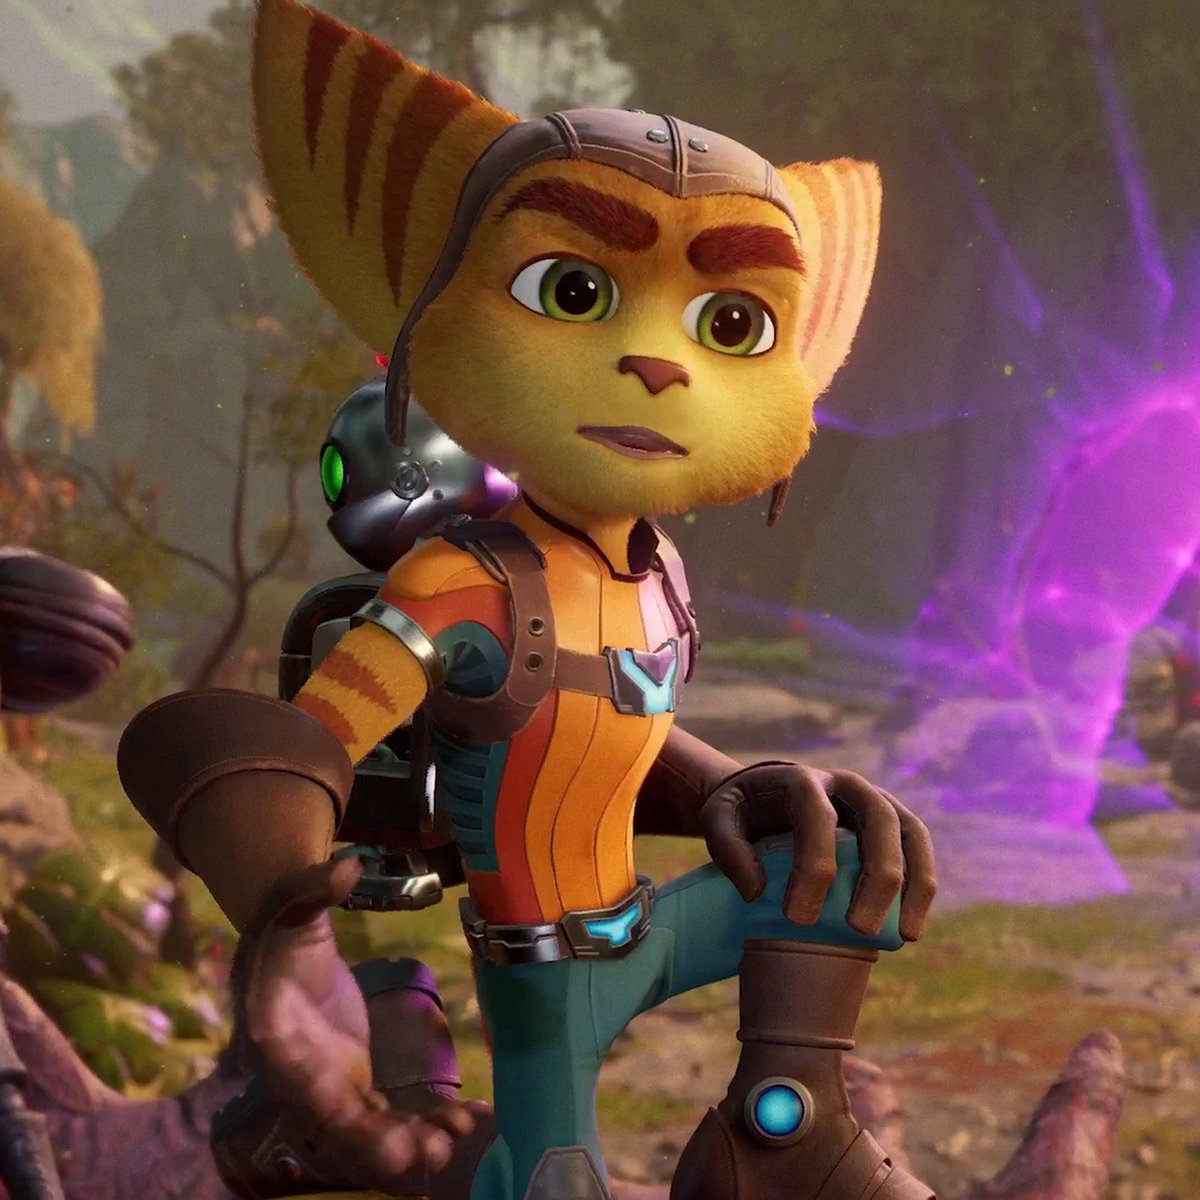 While Xbox, Sony and the FTC fight over Candy Crush lets play some Ratchet & Clank Rift Apart

twitch.tv/stream_during_…

#RatchetAndClank #RatchetPS5 #PS5 #NBADraft